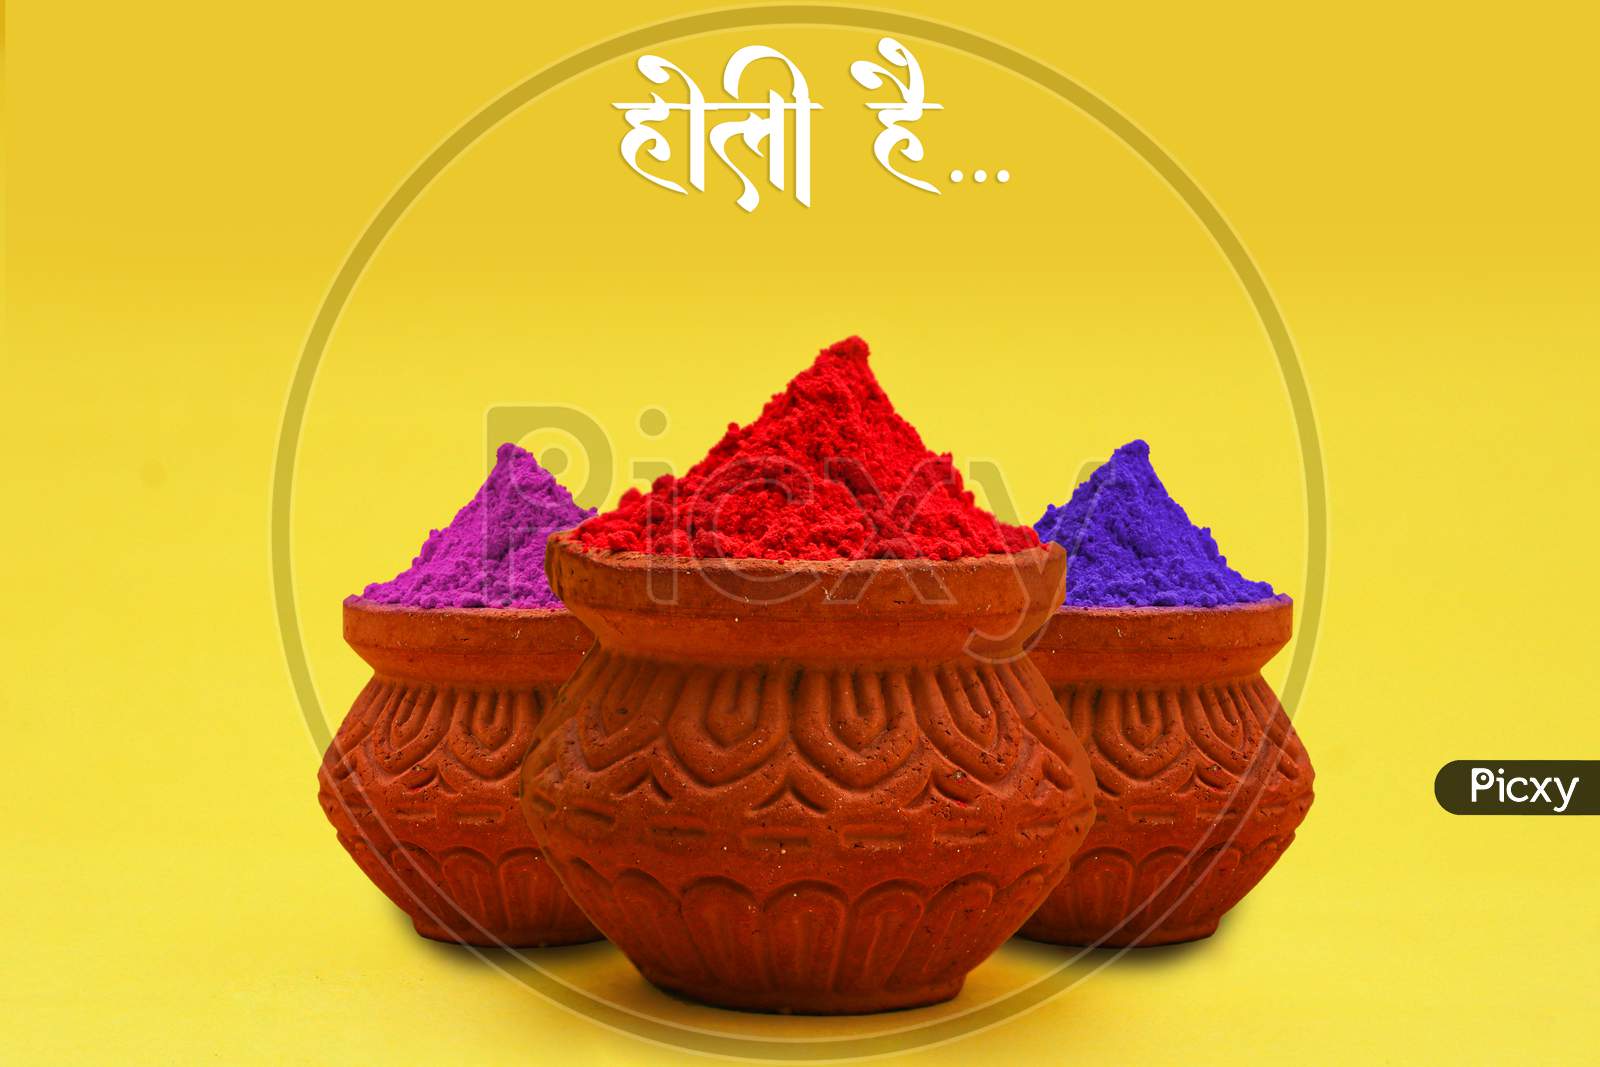 Indian Festival Holi Concept Colour Bowl With Colorful Background And Writing Holi Hai In Marathi Calligraphy.